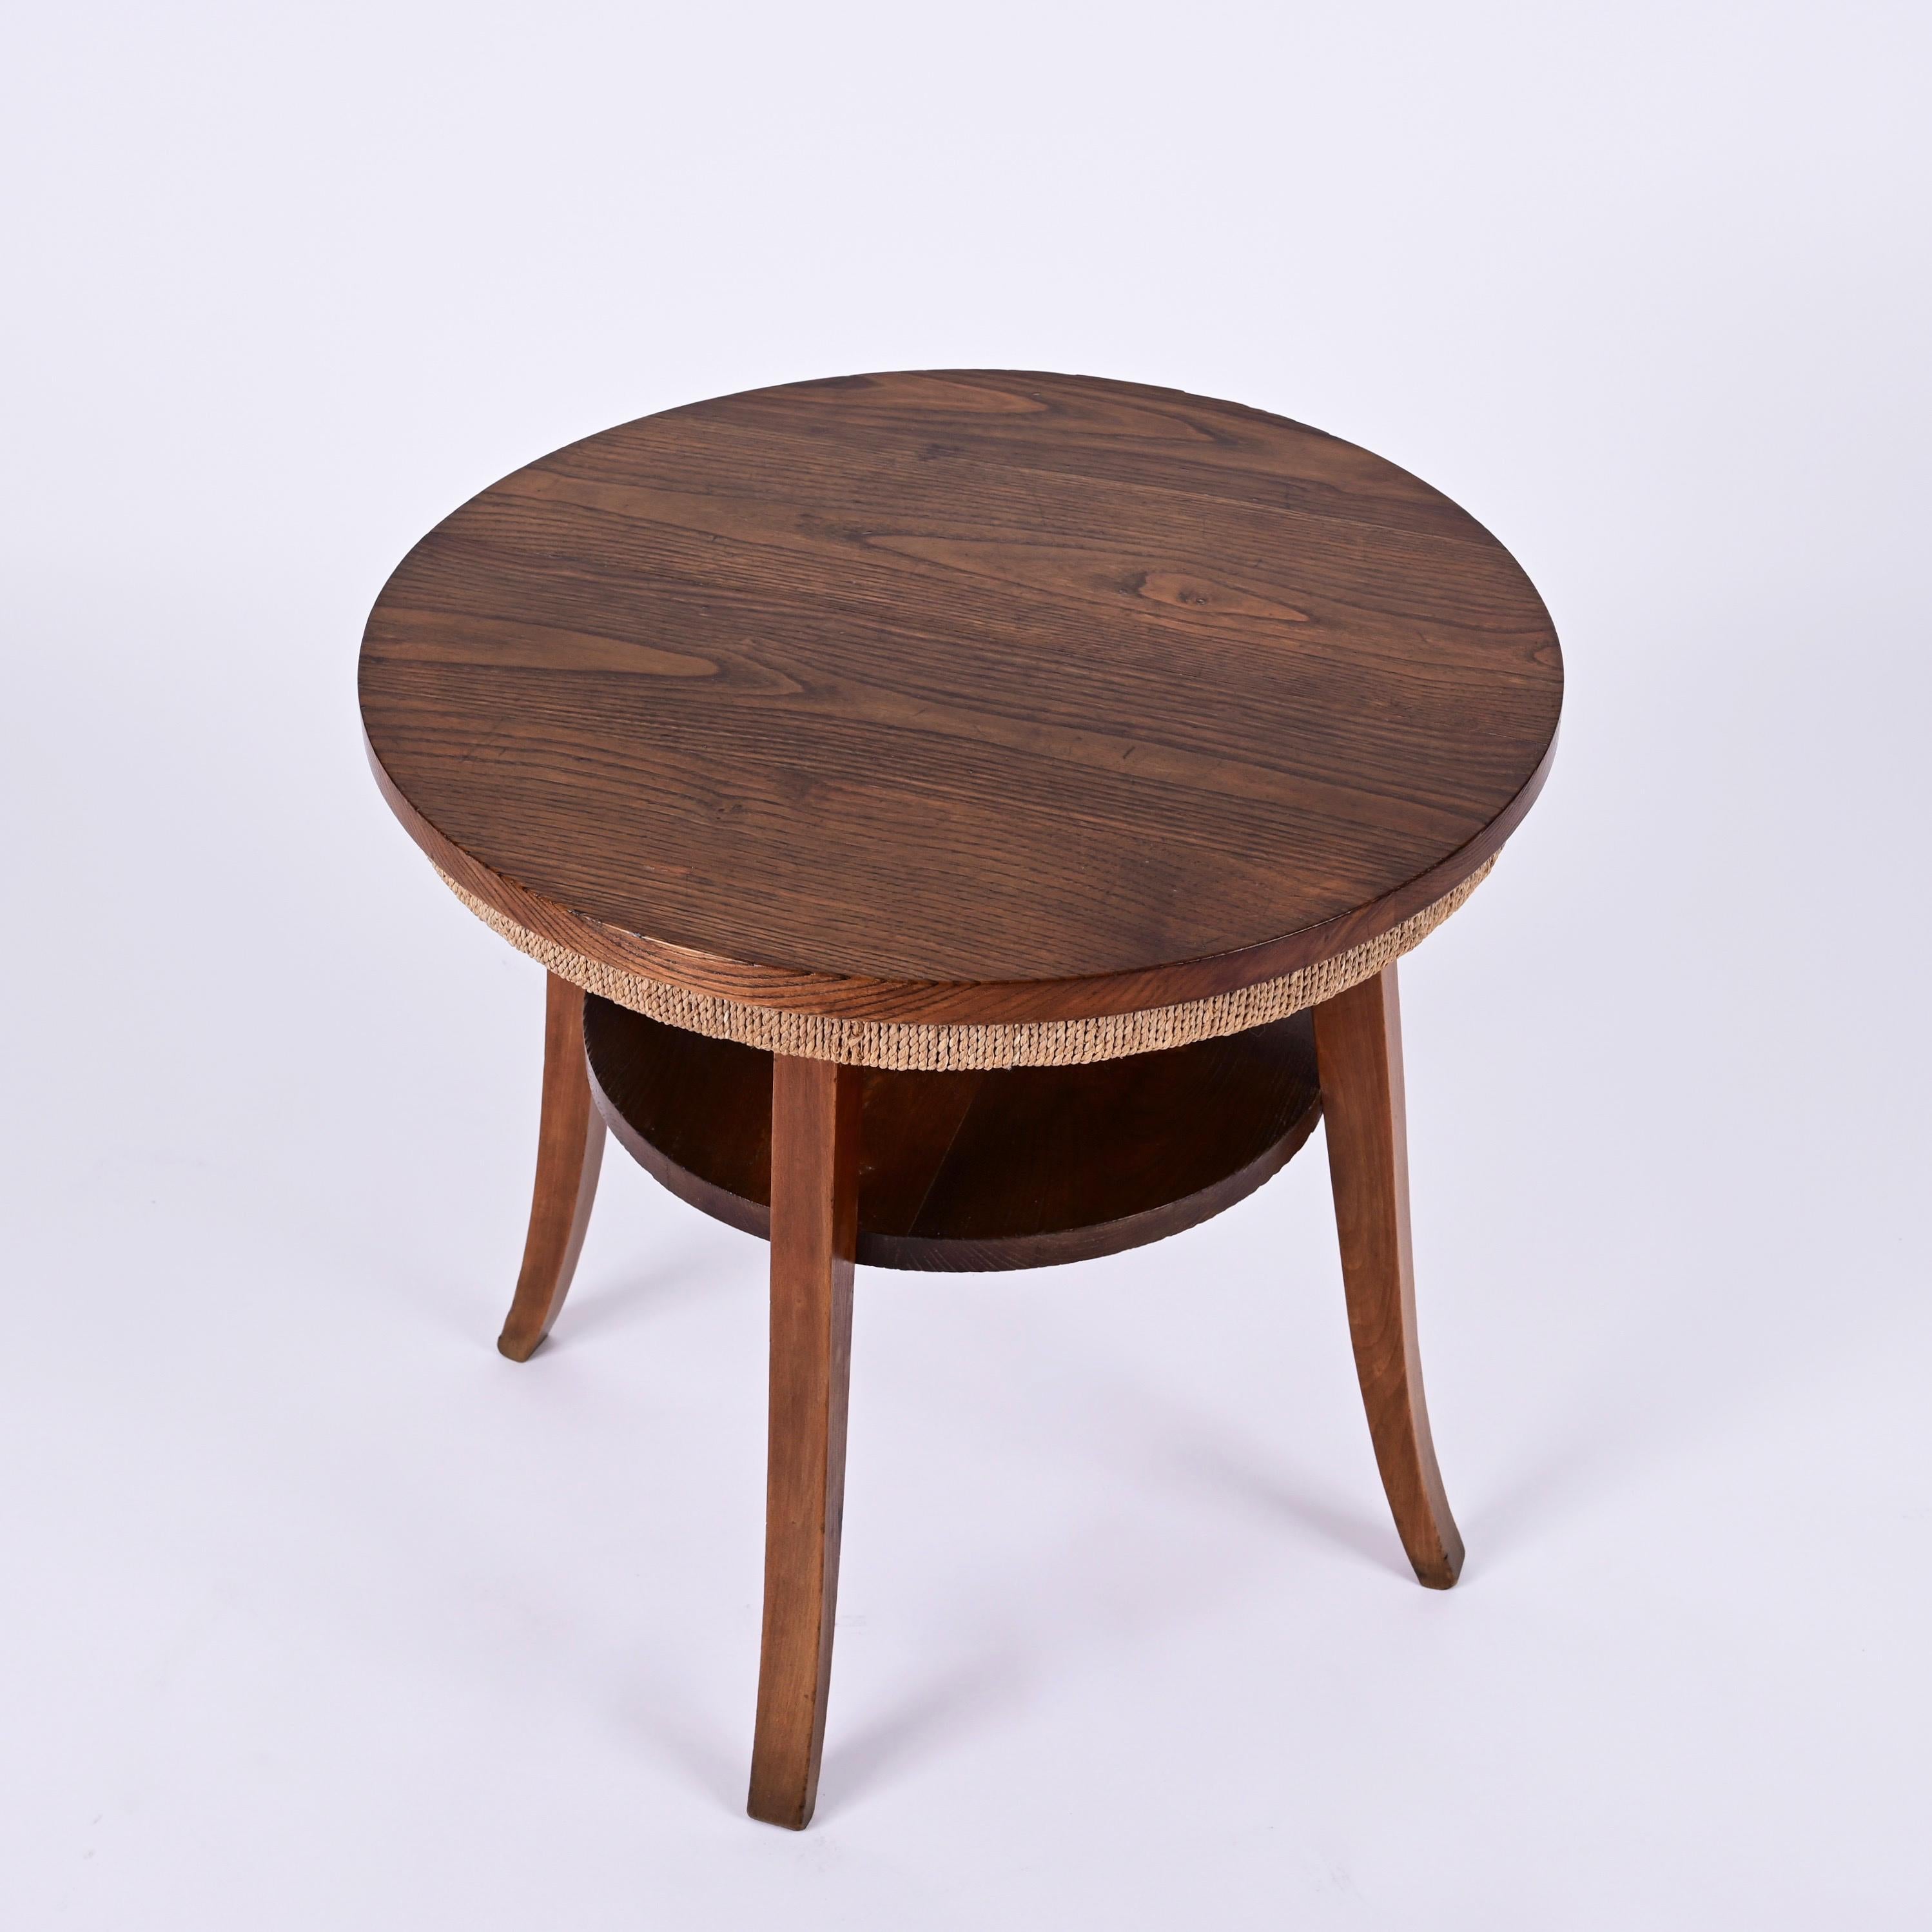 Midcentury Two-Tier Round Rope and Chestnut Wood Italian Coffee Table, 1950s For Sale 3